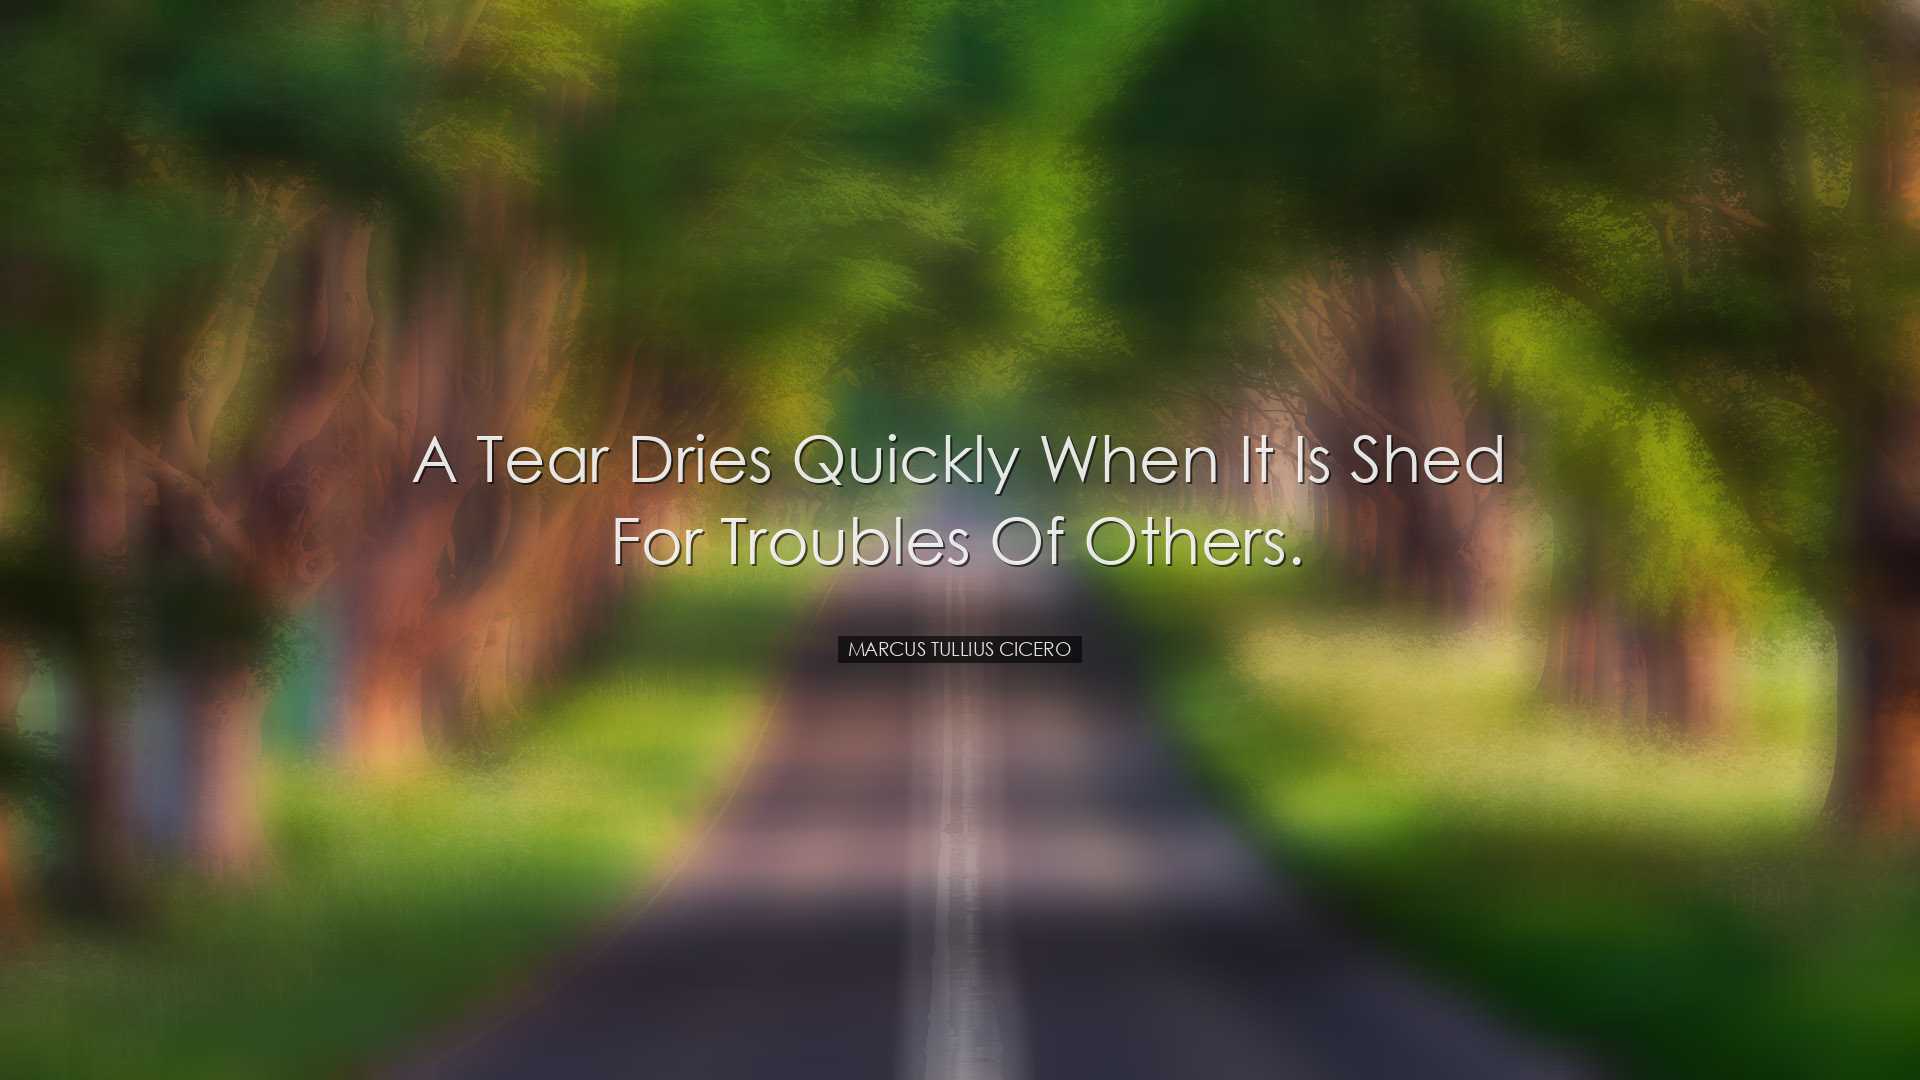 A tear dries quickly when it is shed for troubles of others. - Mar